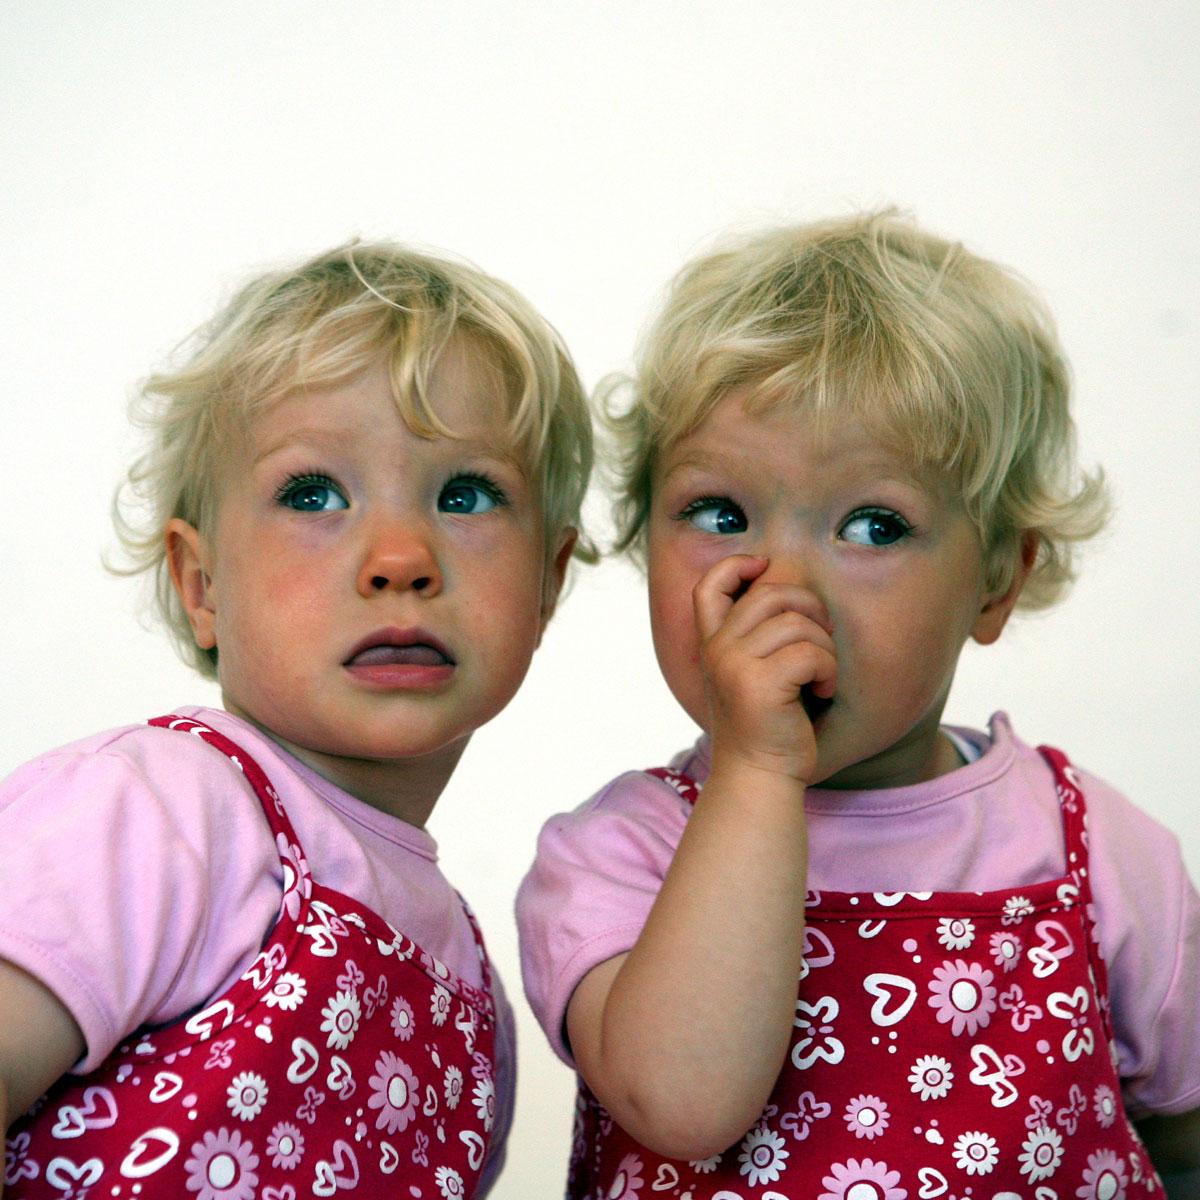 A pair of blonde twin toddlers look in opposite directions from the camera